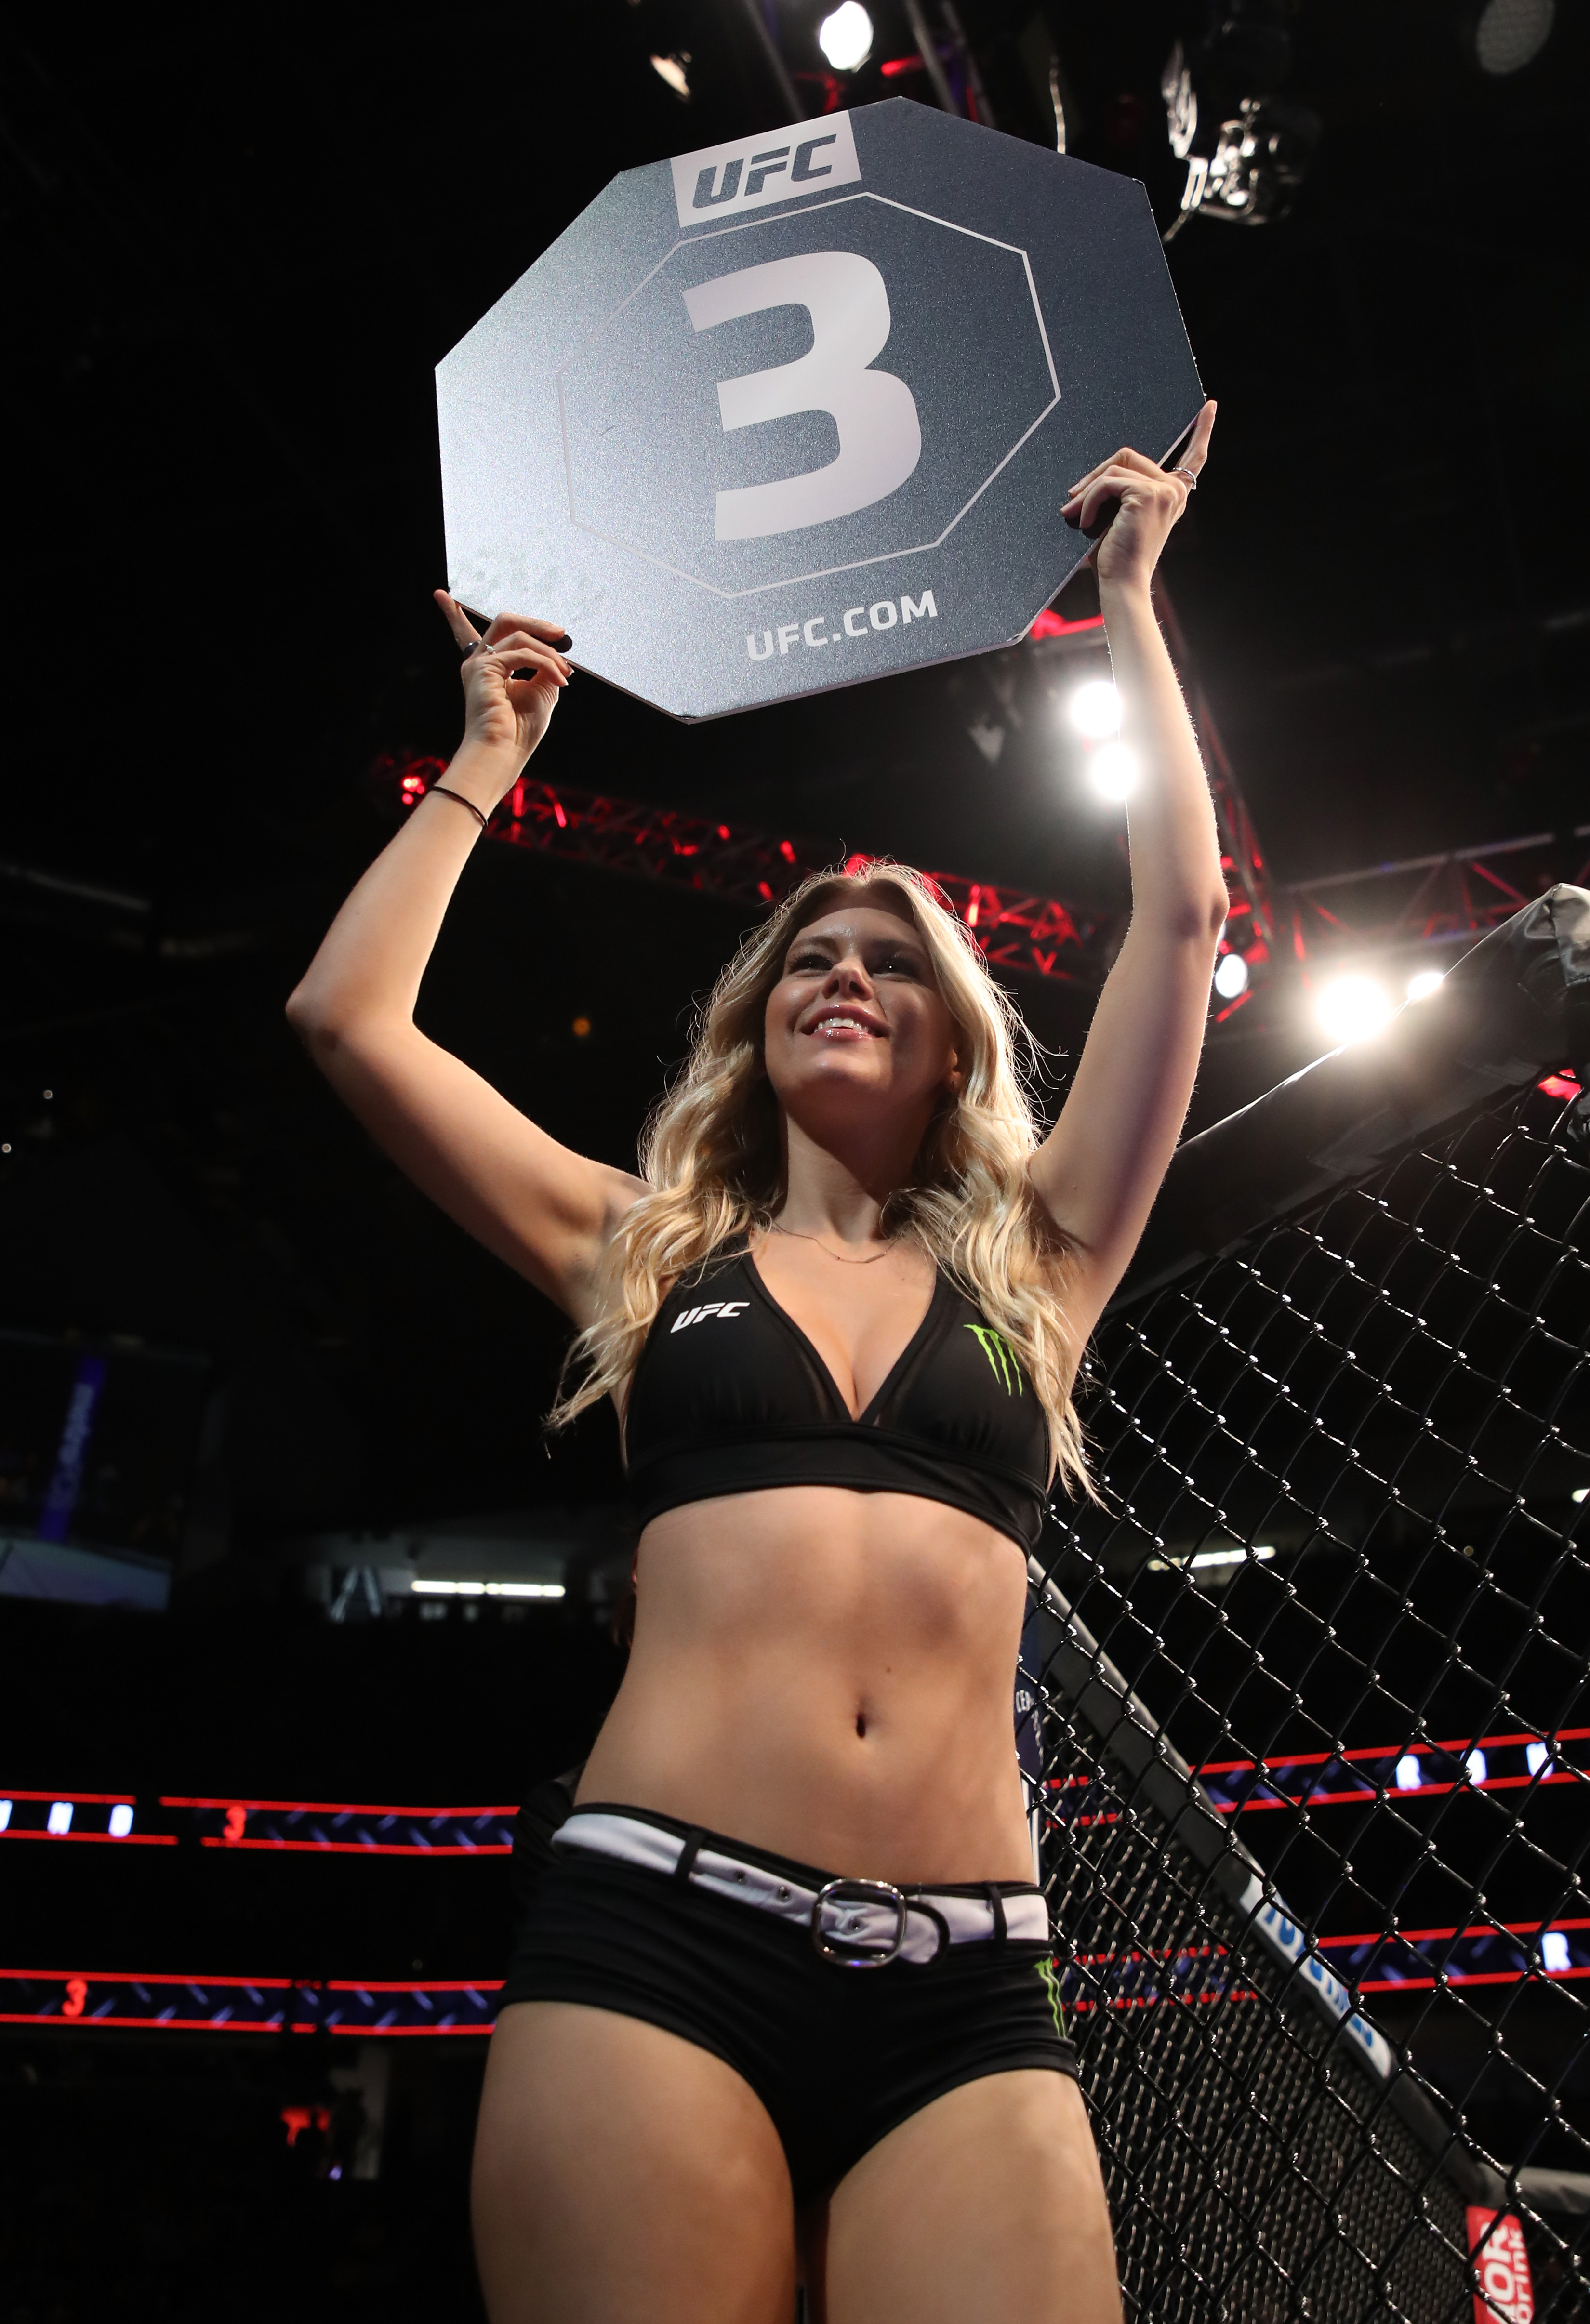 The UFC's famous octagon girls include Chrissy Blair